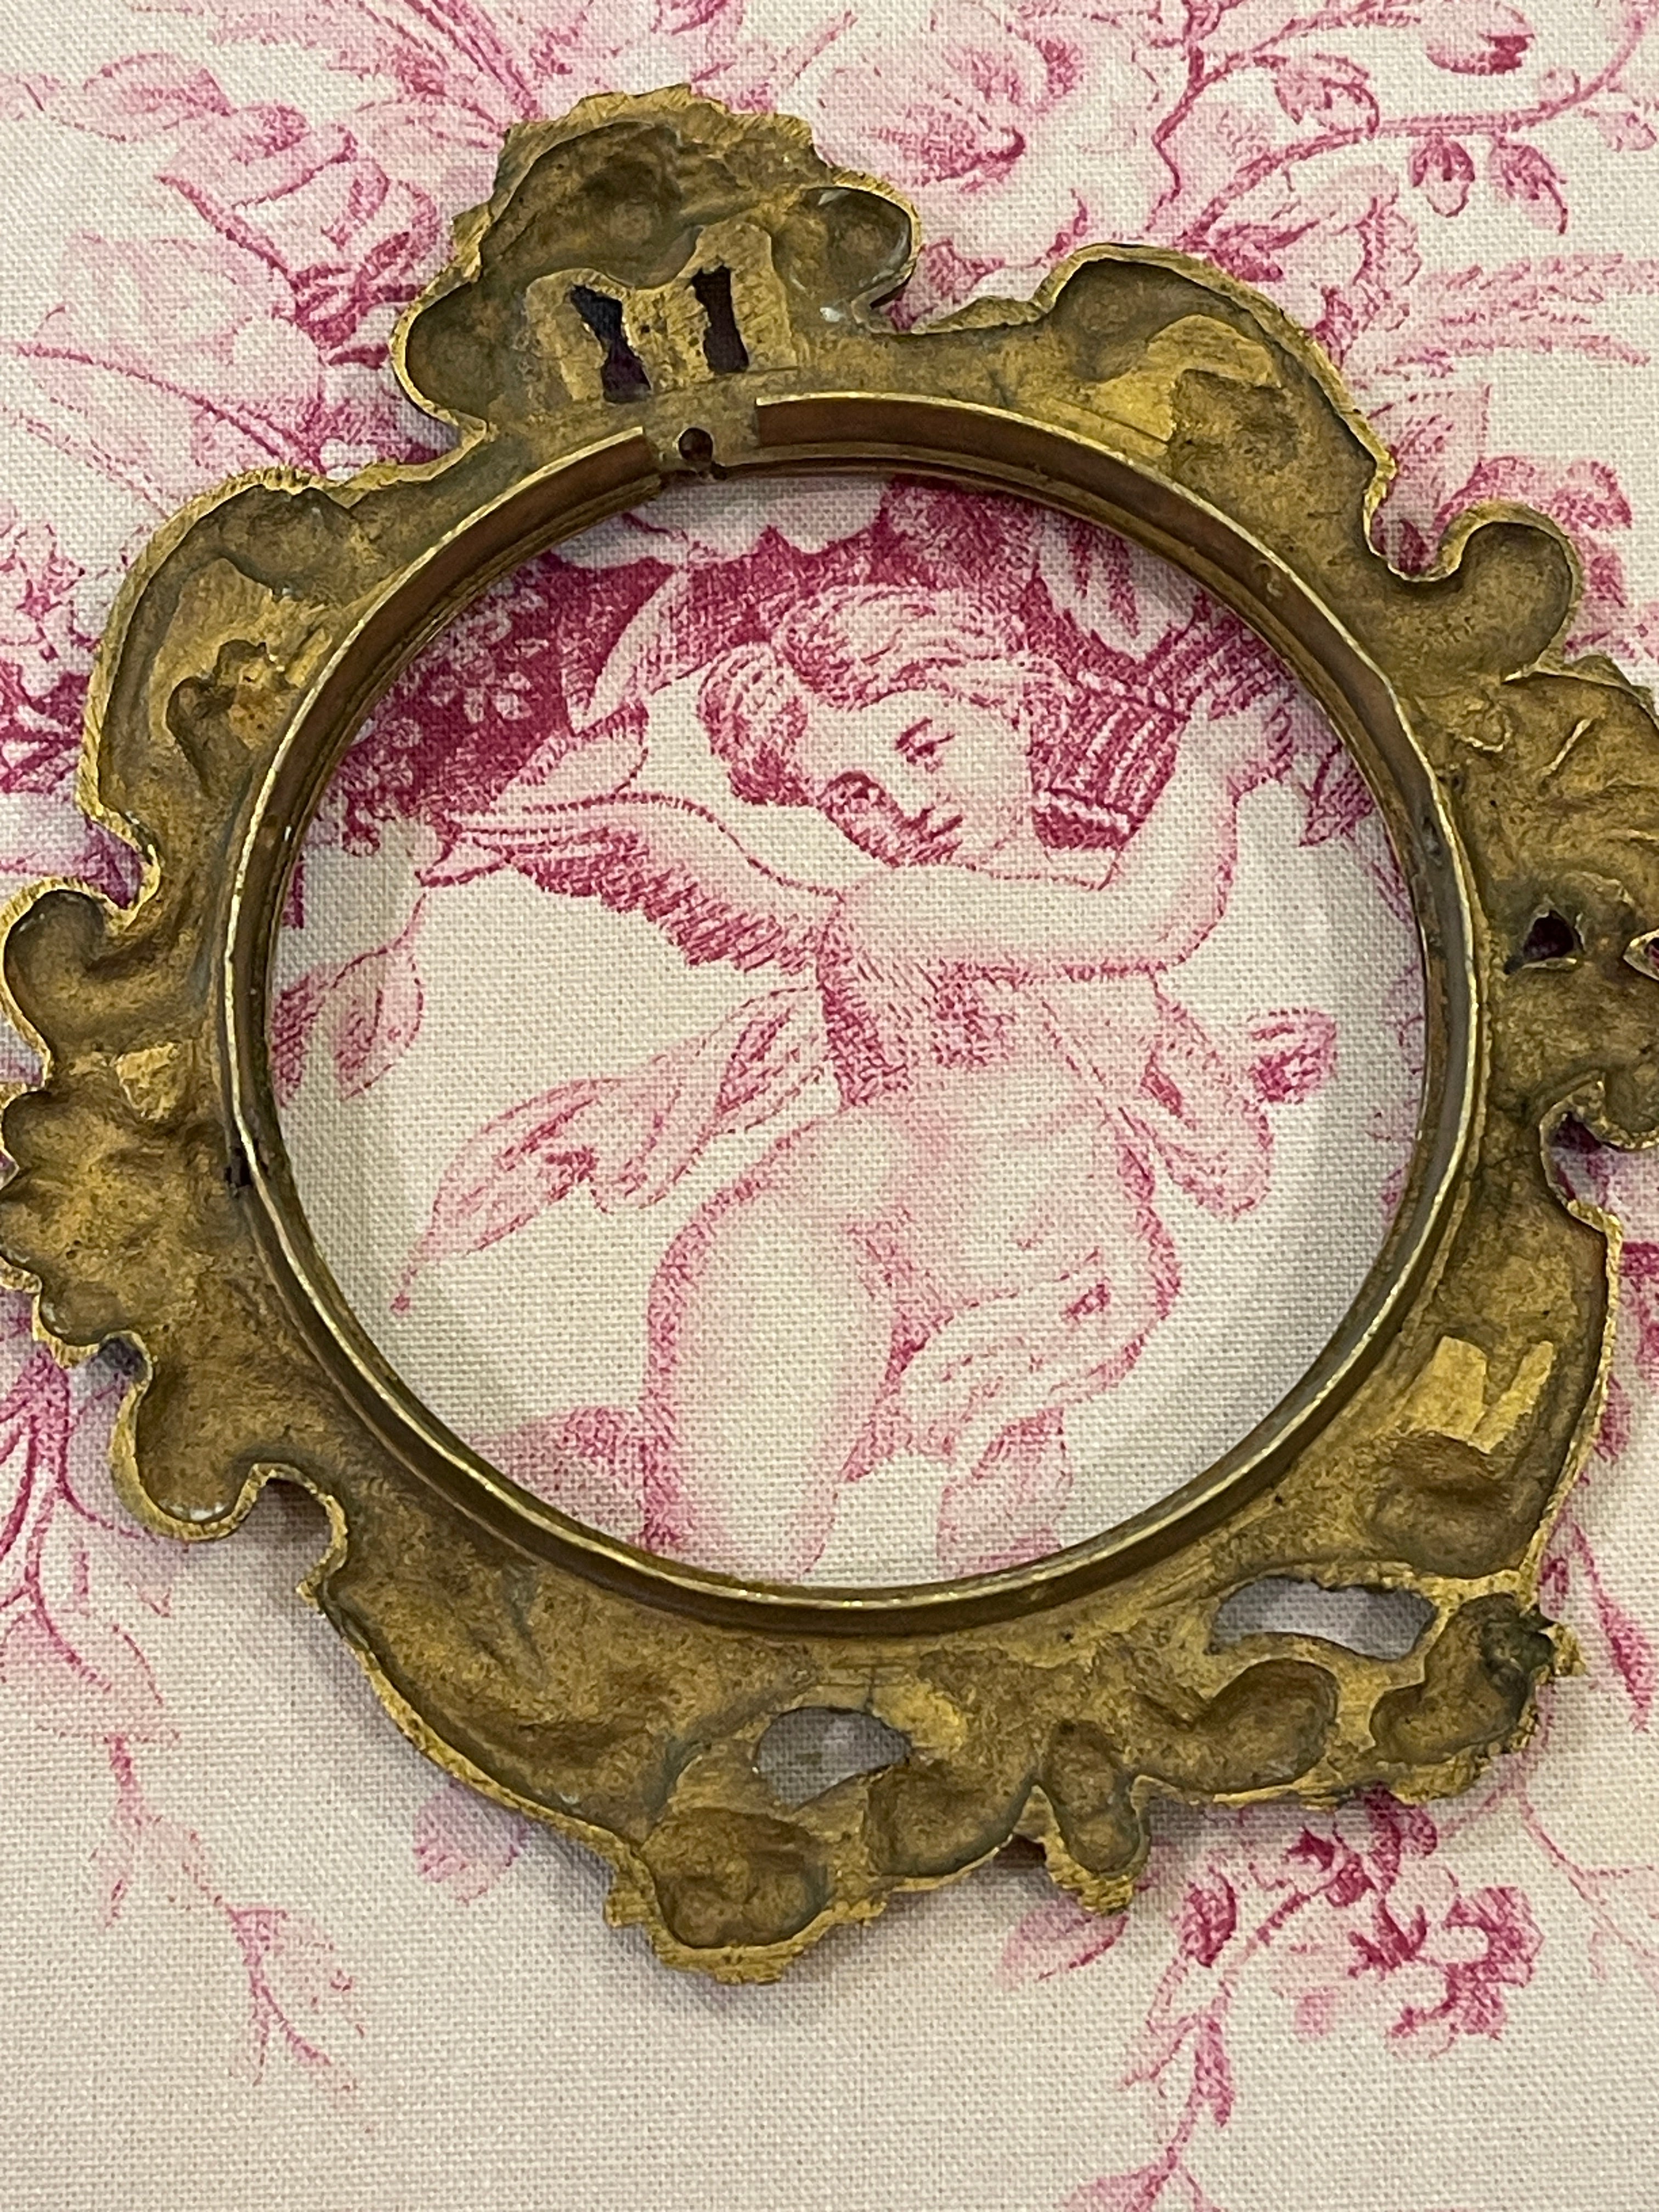 Exquisite 19th century French Ormolu Frame